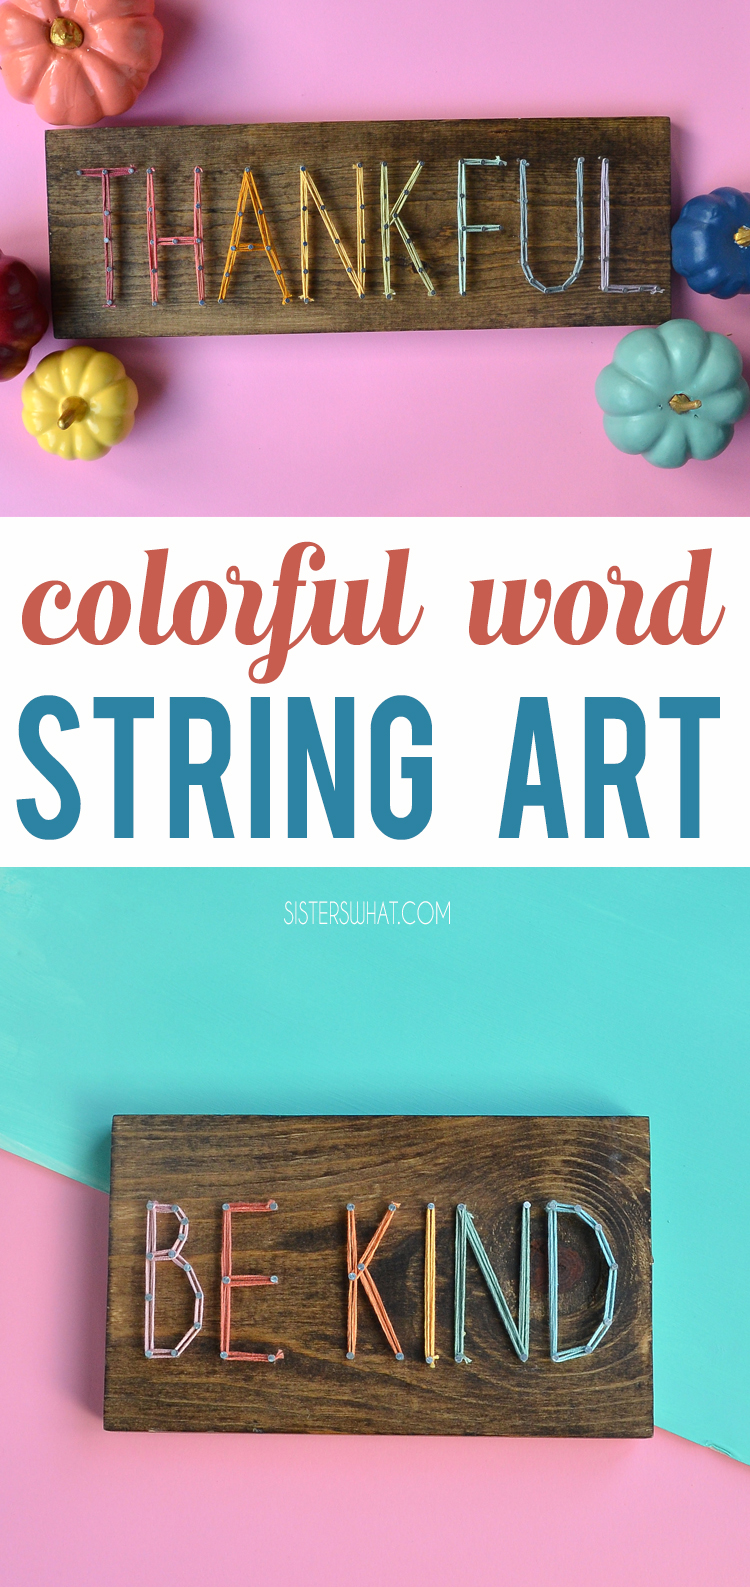 A easy, simple colorful string art craft and pattern idea